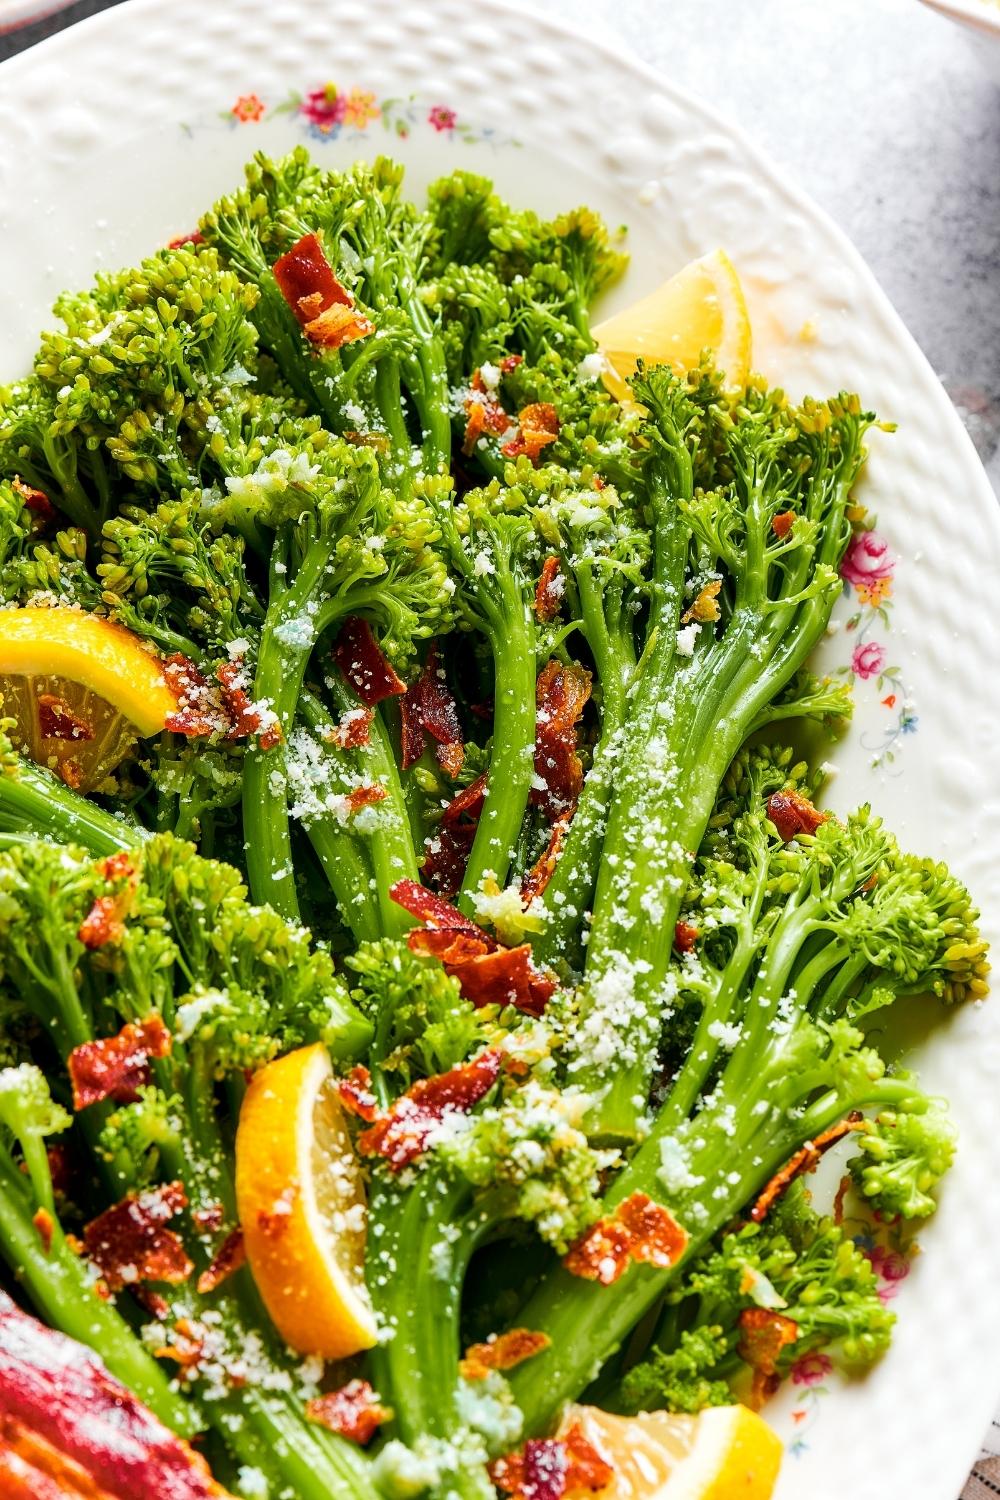 A bunch of broccolini on part of a white plate.